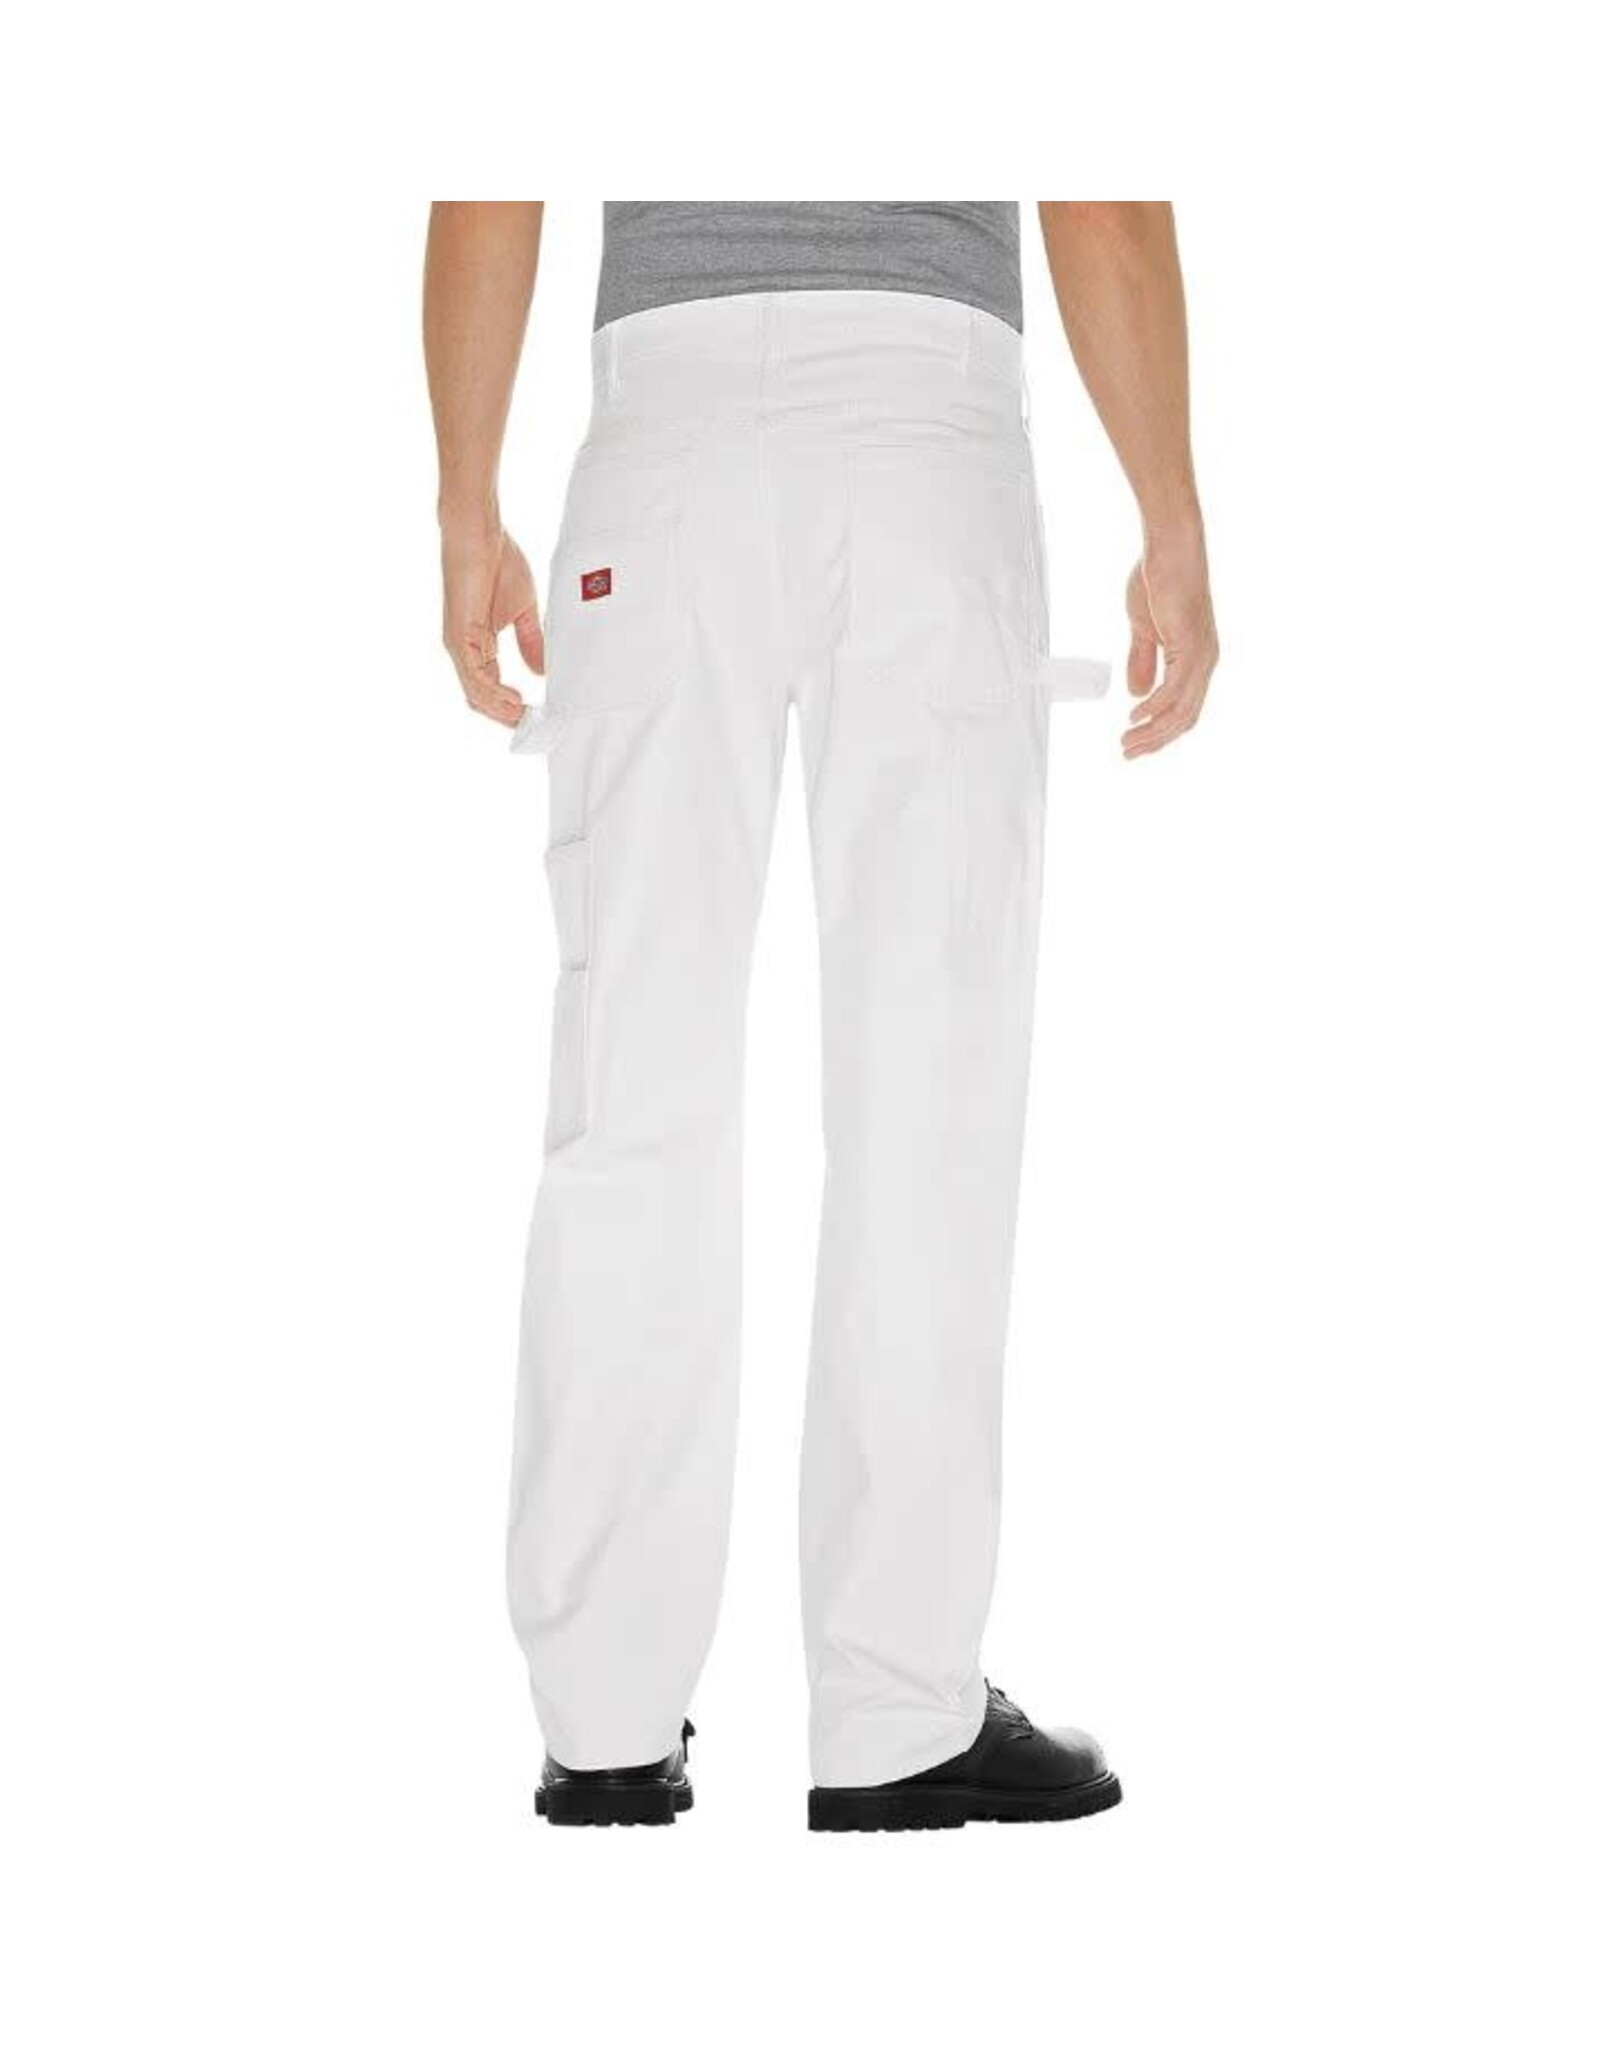 DICKIES Relaxed Fit Painter's Pant Utility White - 1953CWH